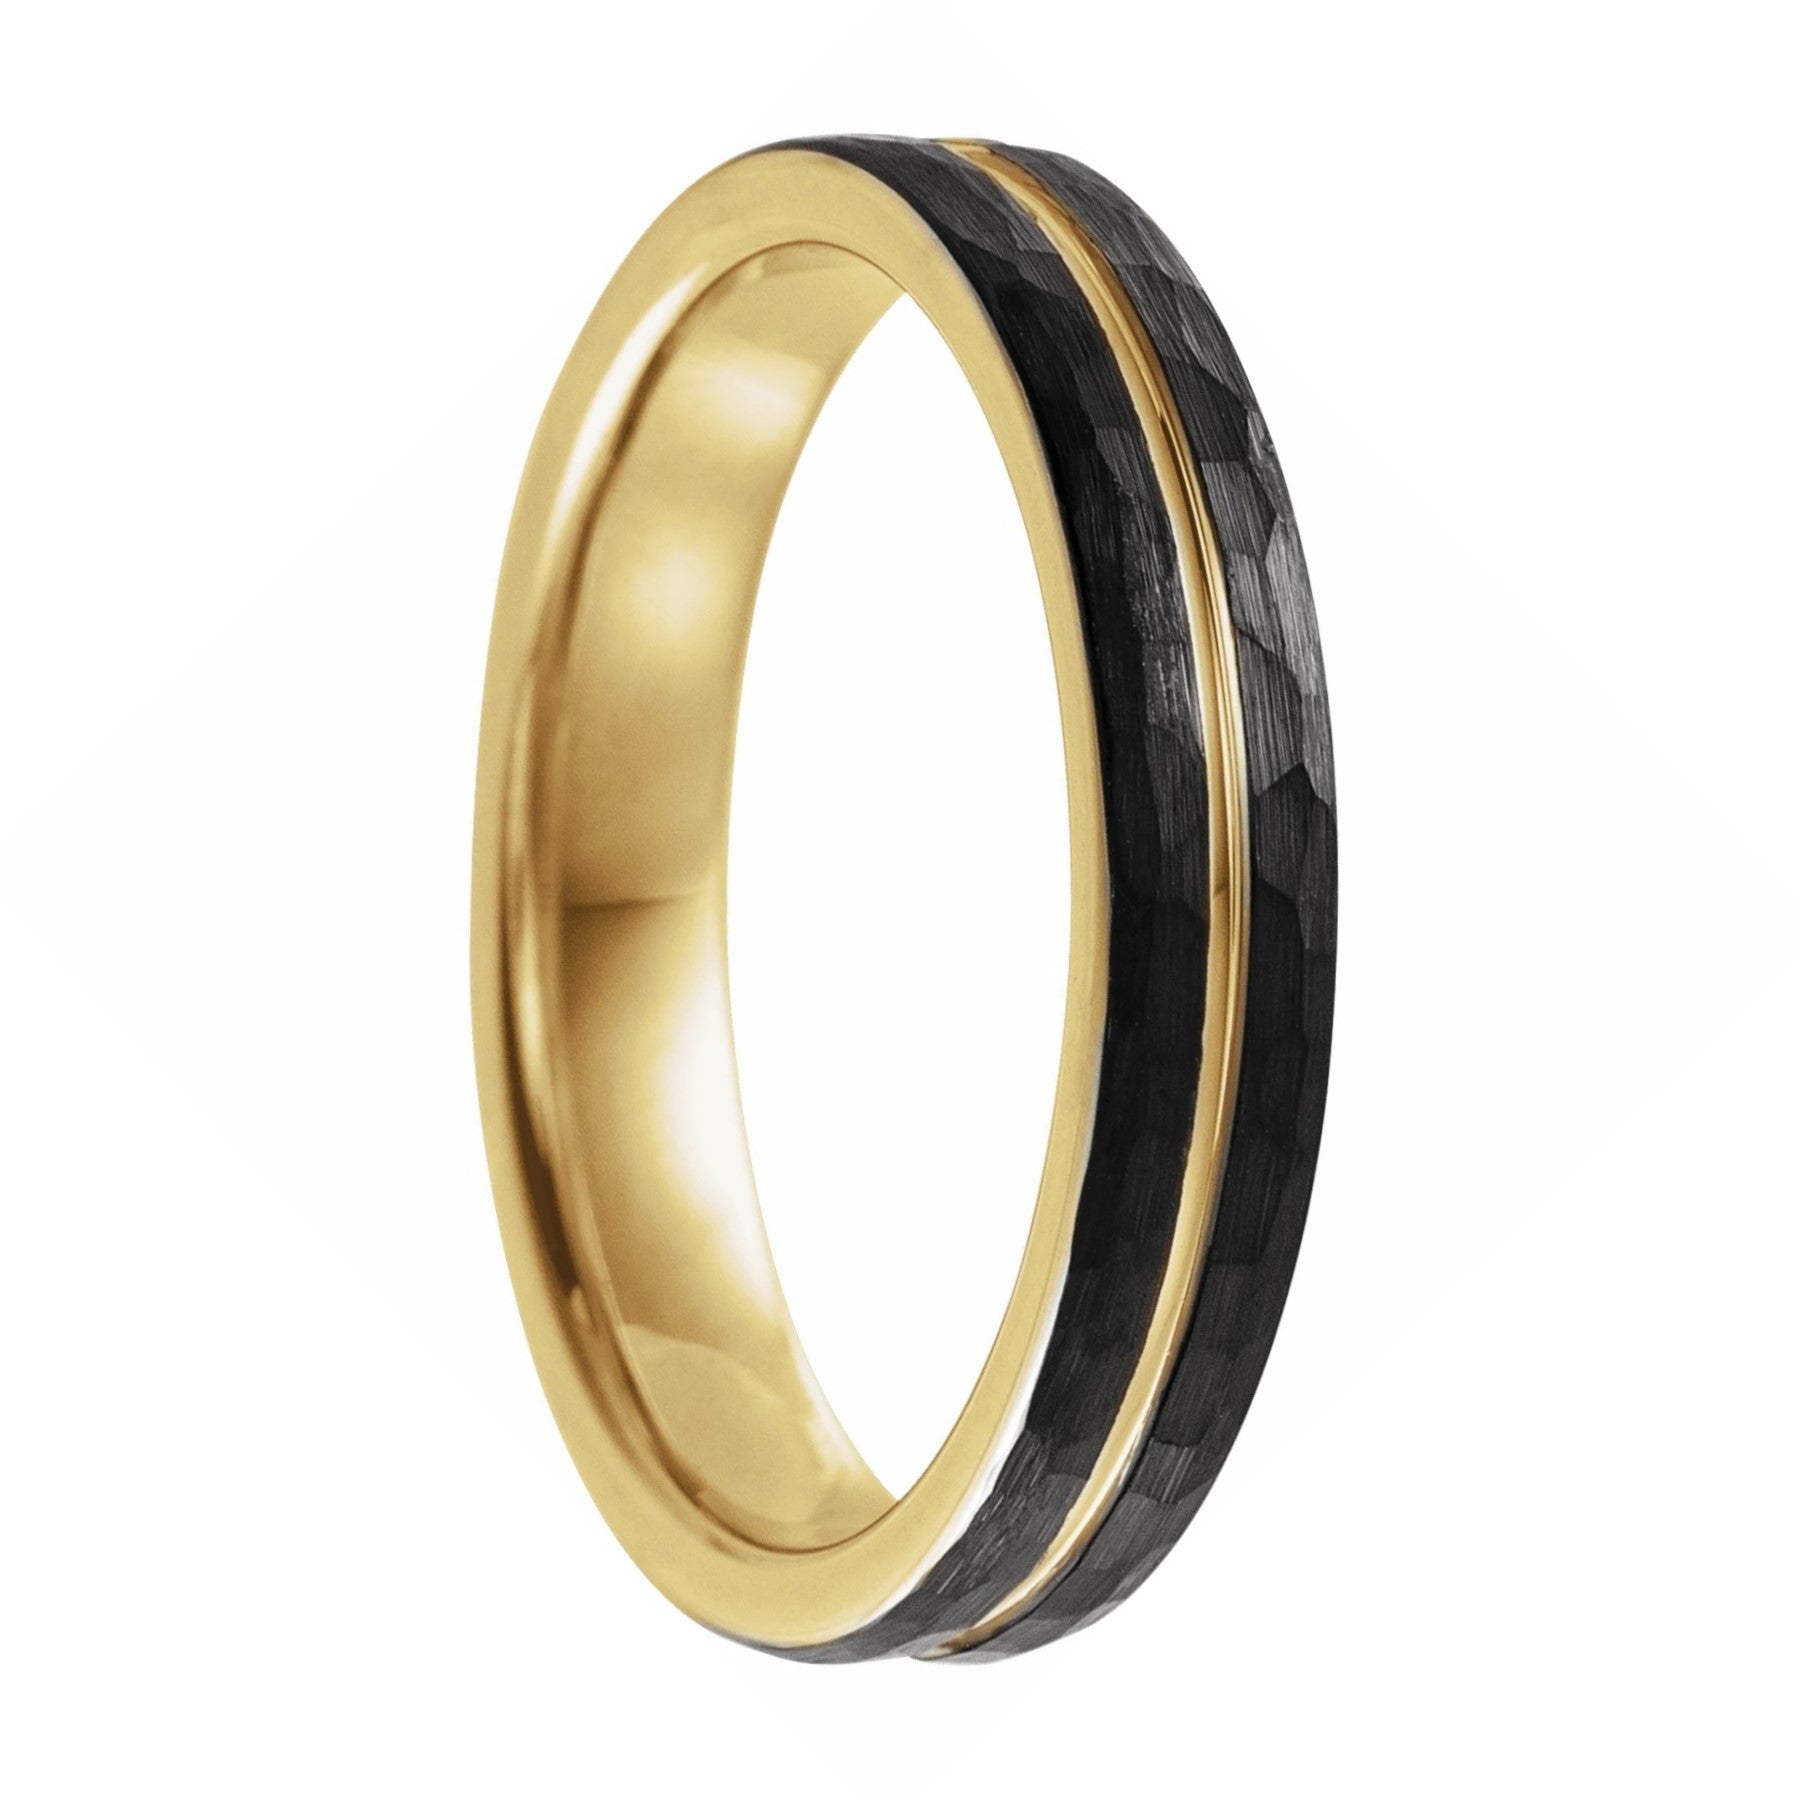 Hammered Black Tungsten Wedding Band with Yellow Gold Groove & Interior